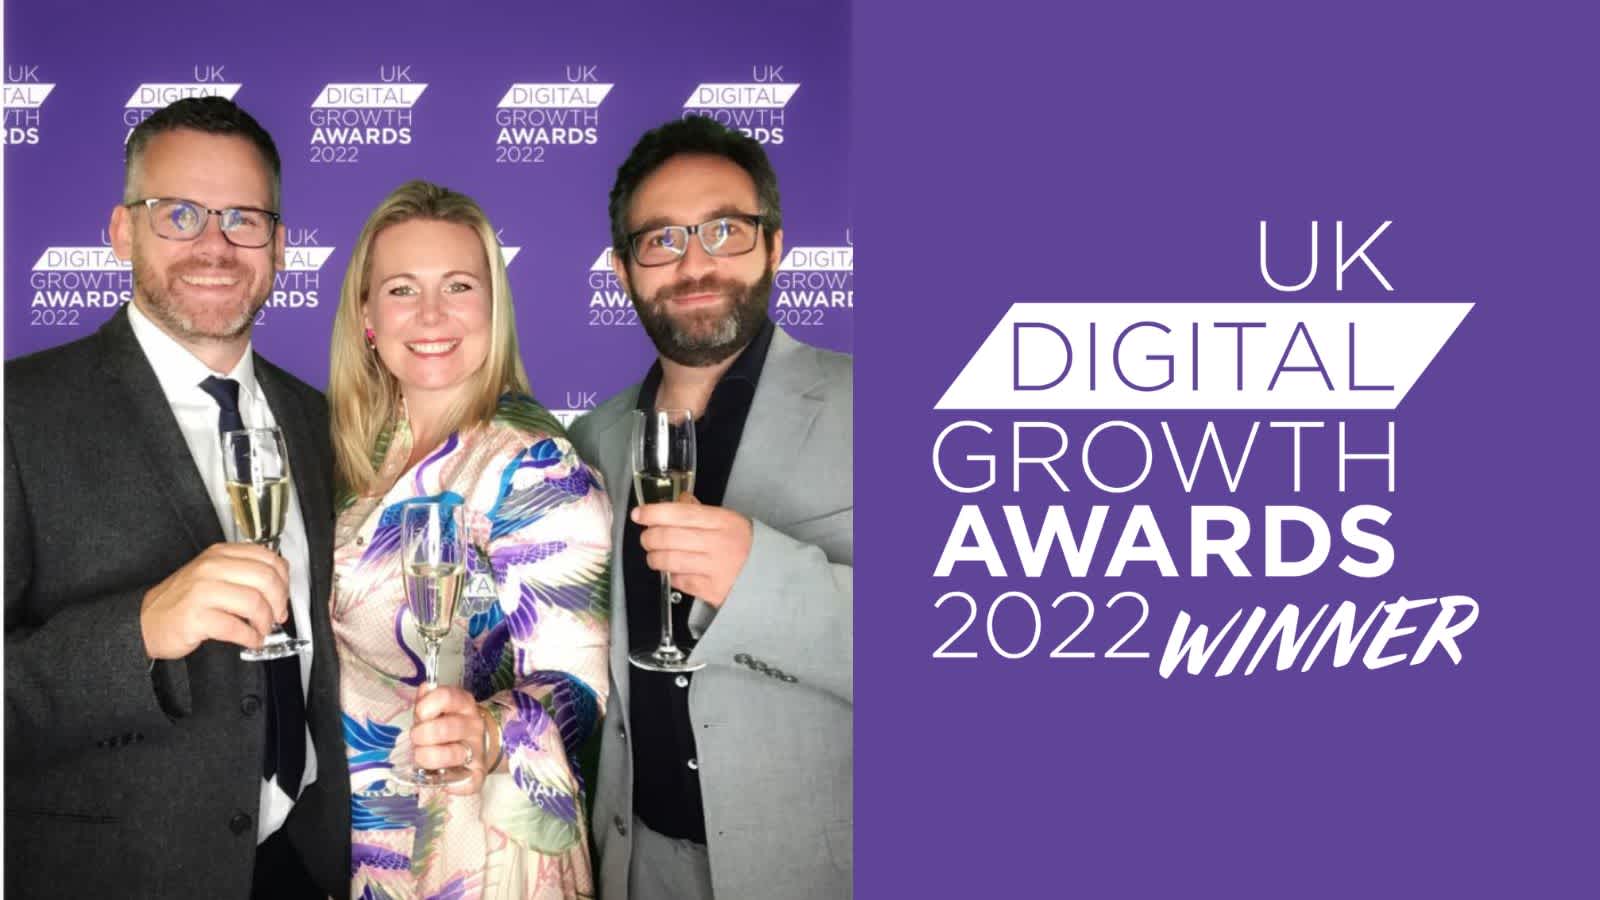 Mike, Jaye and Alex at the Digital Growth Awards